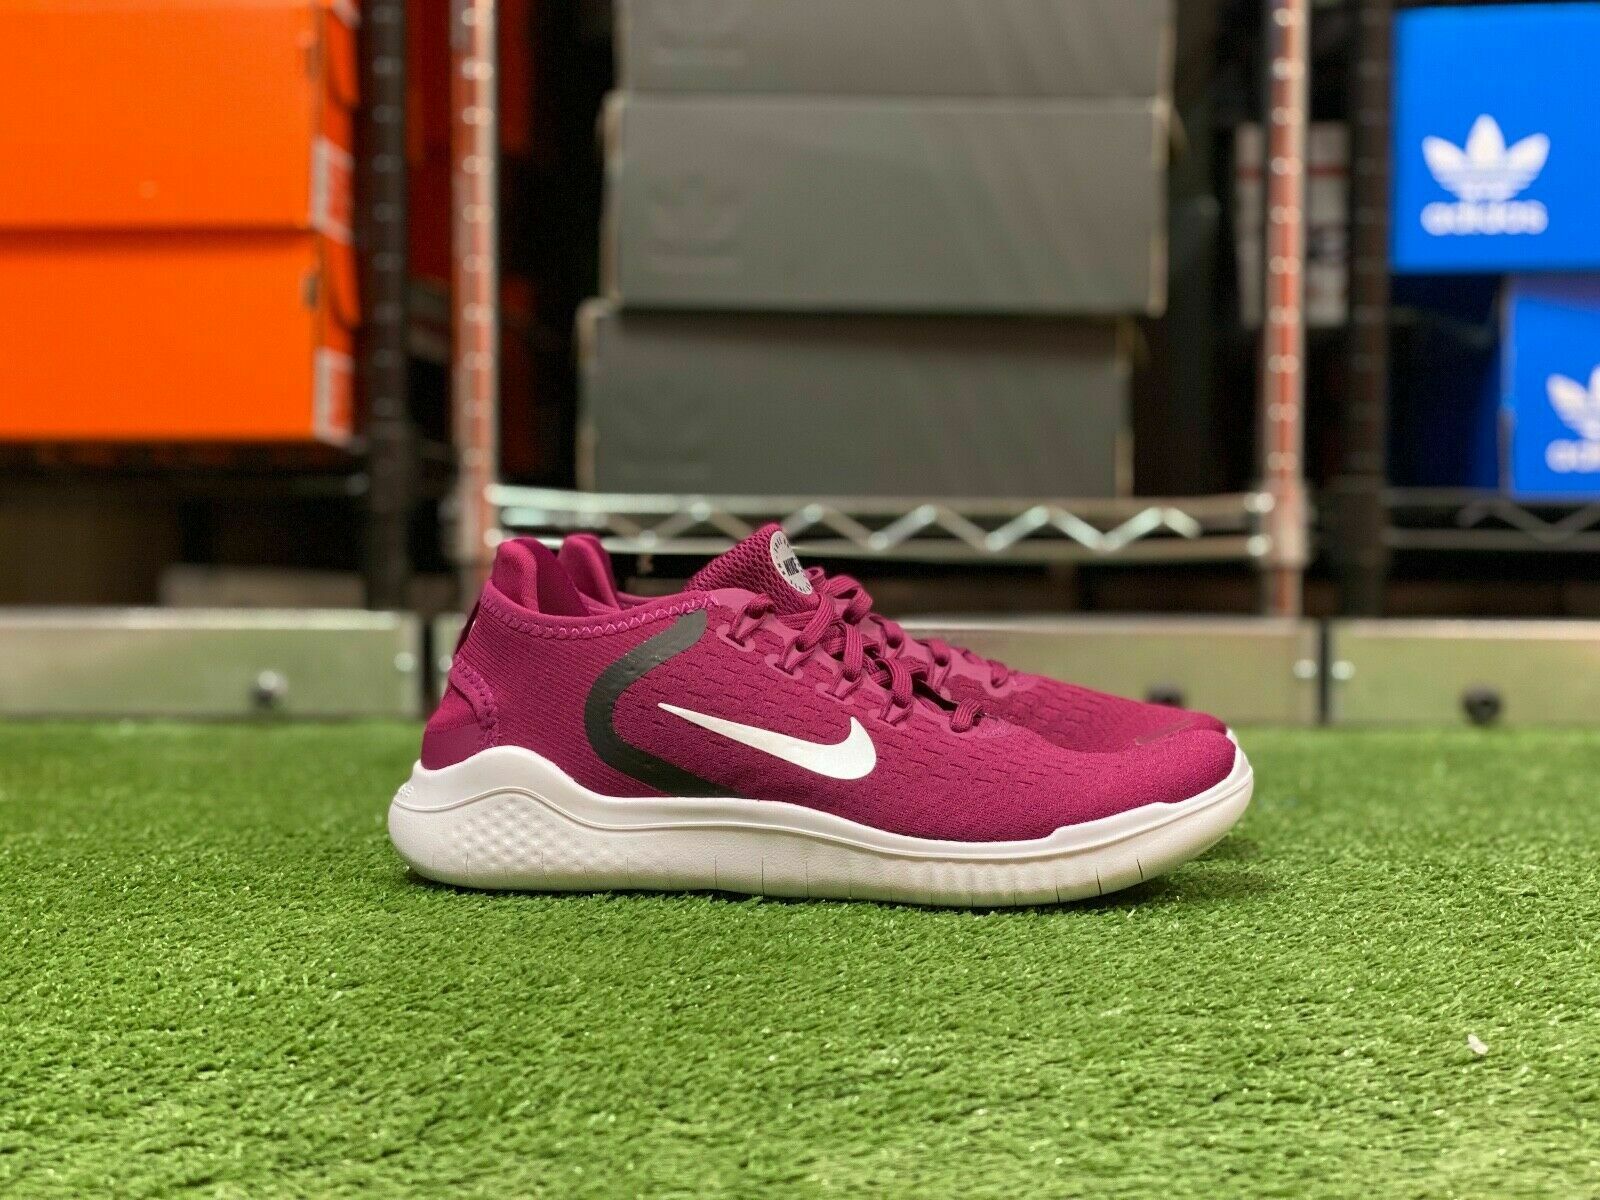 Primary image for Nike Free RN 2018 Womens Running Shoes TrueBerry/Silver 942837-604 NEW Size 7